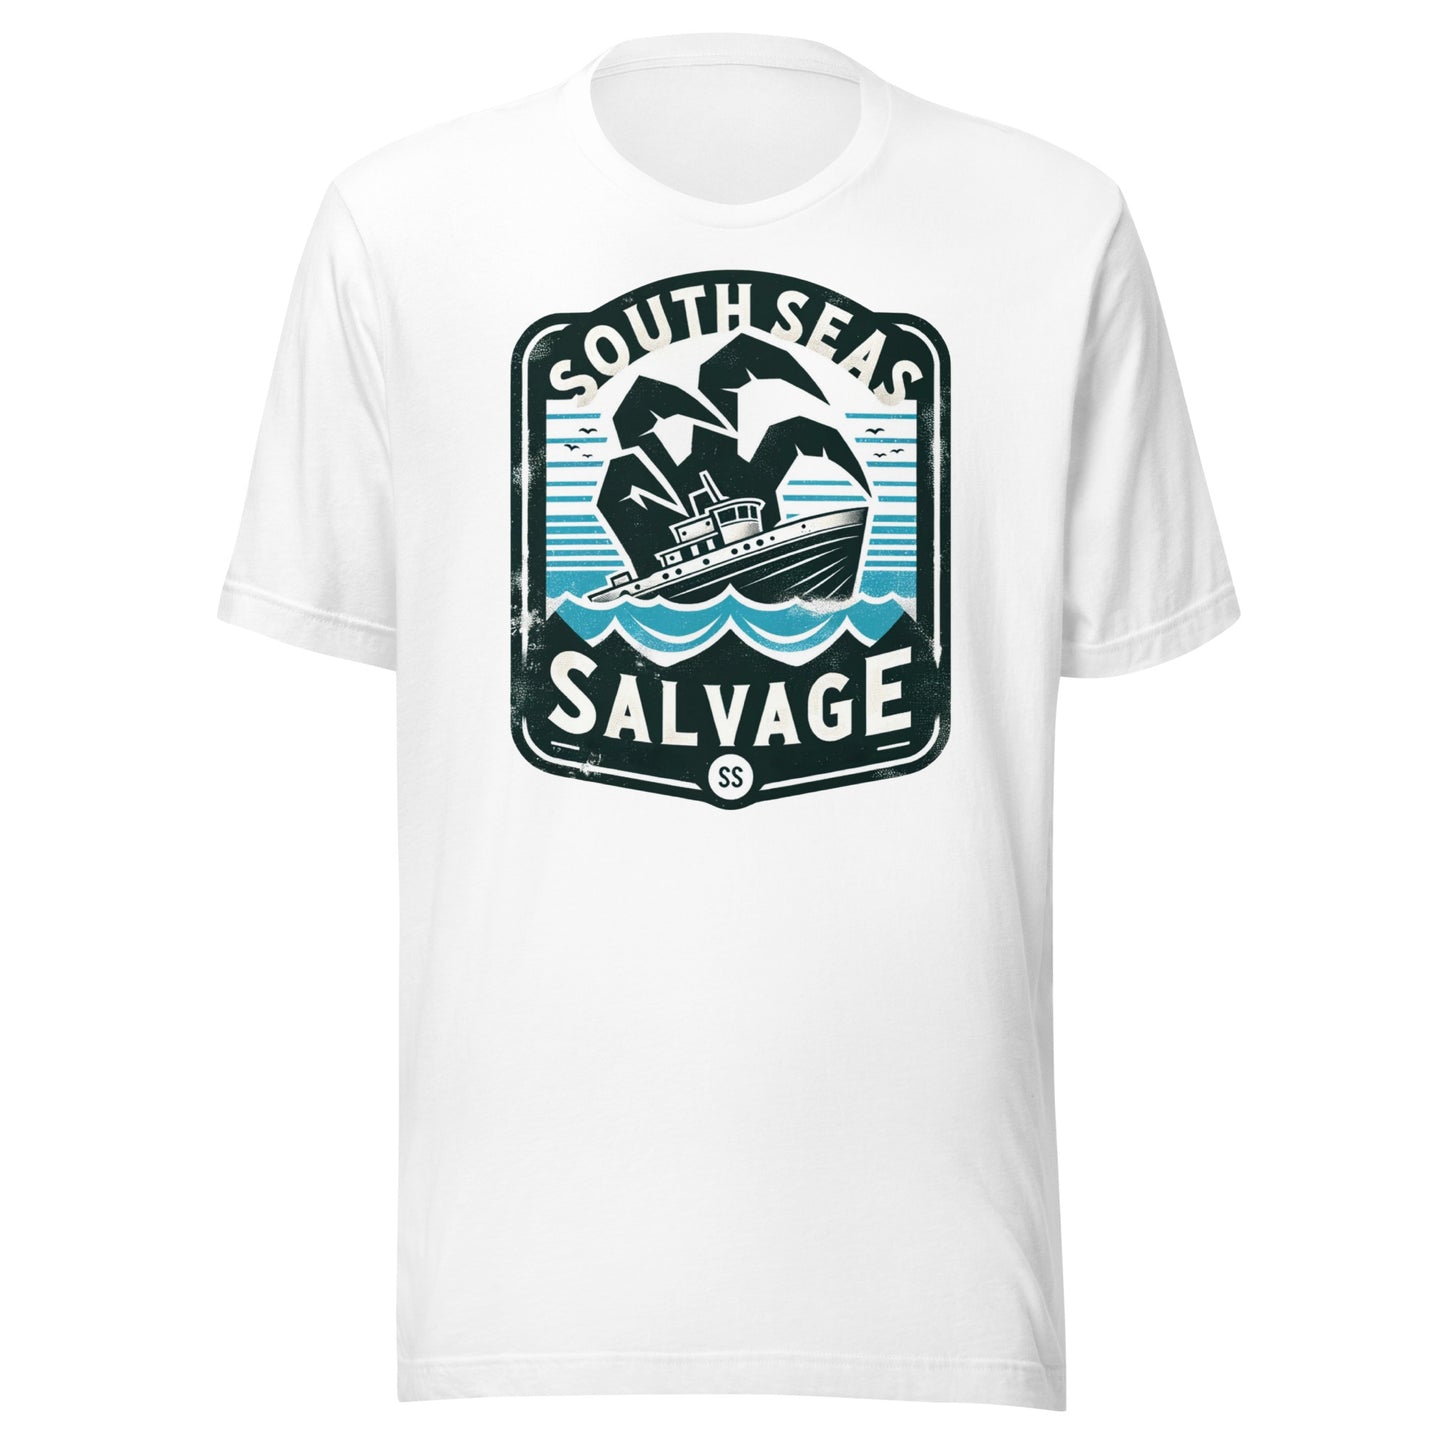 South Seas Salvage Company Surviving Monster Attacks Since 1954 Unisex t-shirt